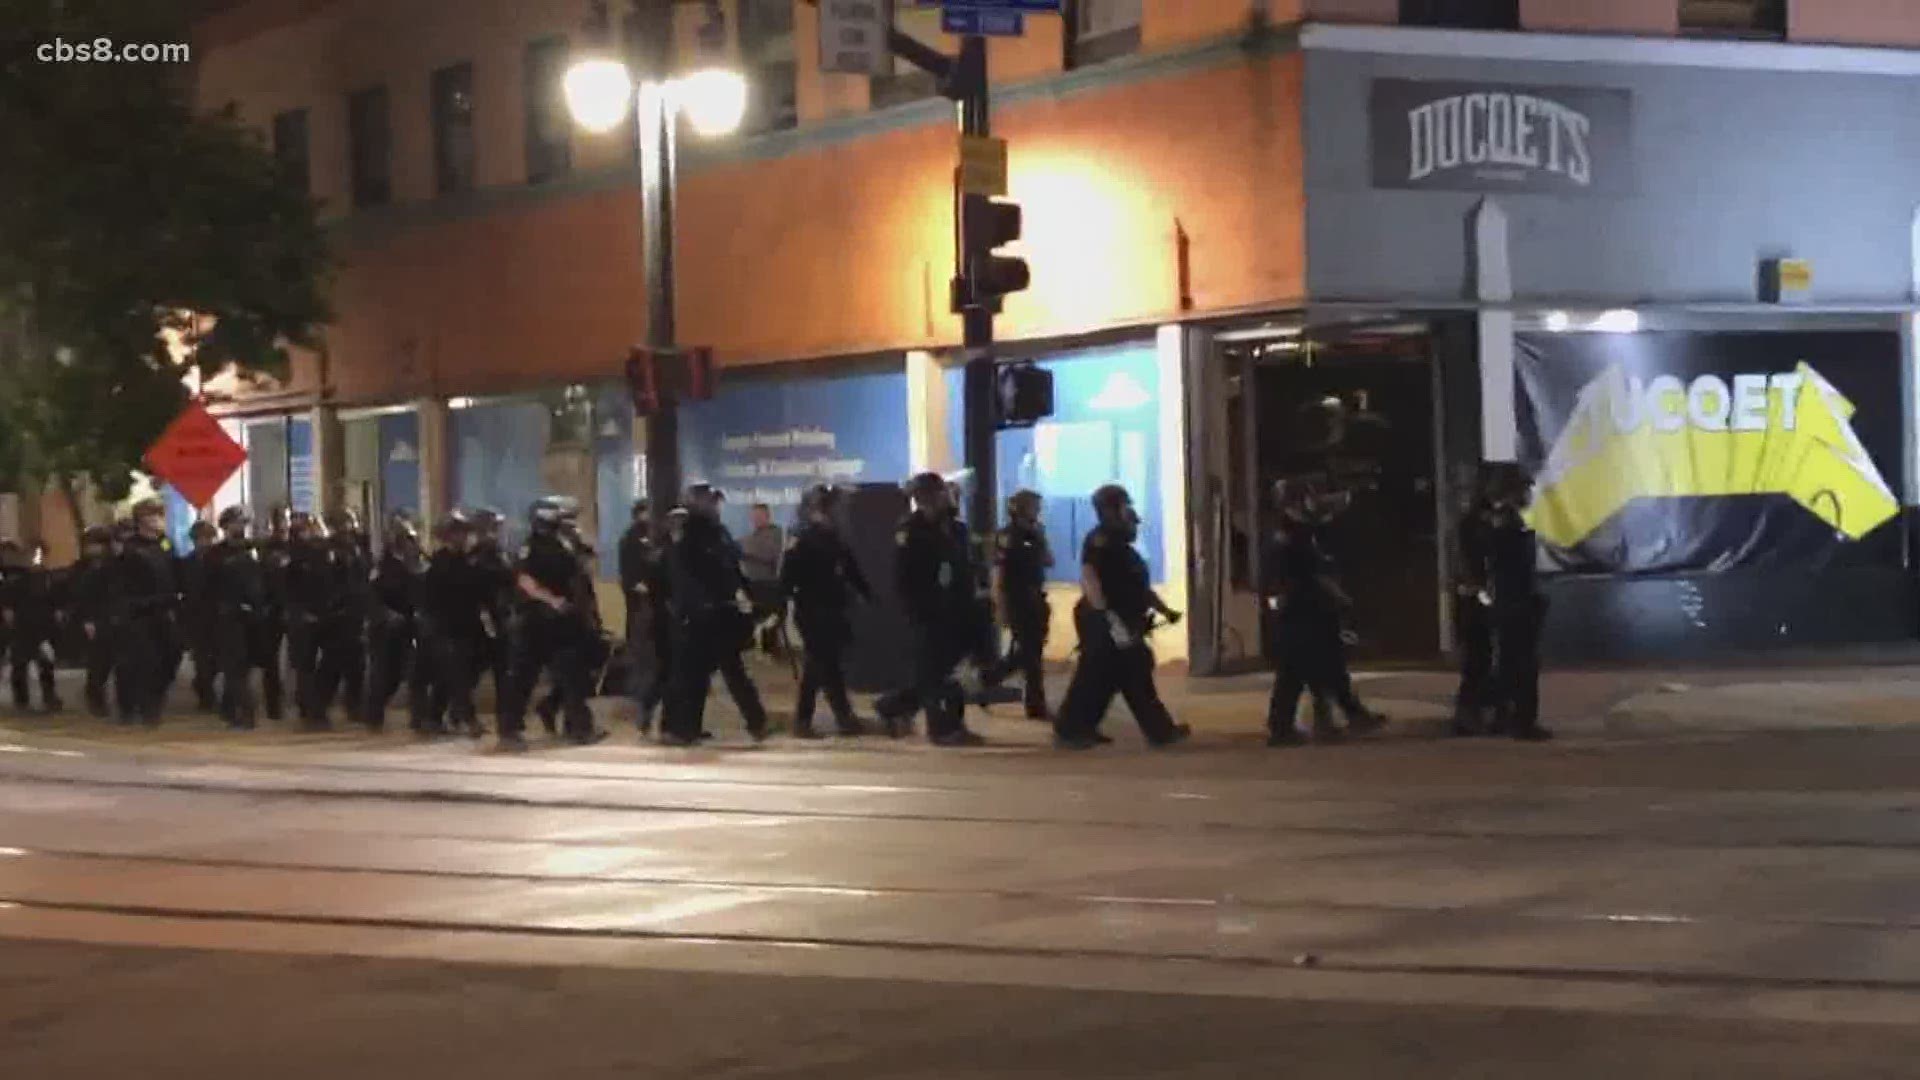 On Monday night, in downtown San Diego police declared an unlawful assembly after a peaceful protest in Balboa Park and Hillcrest.